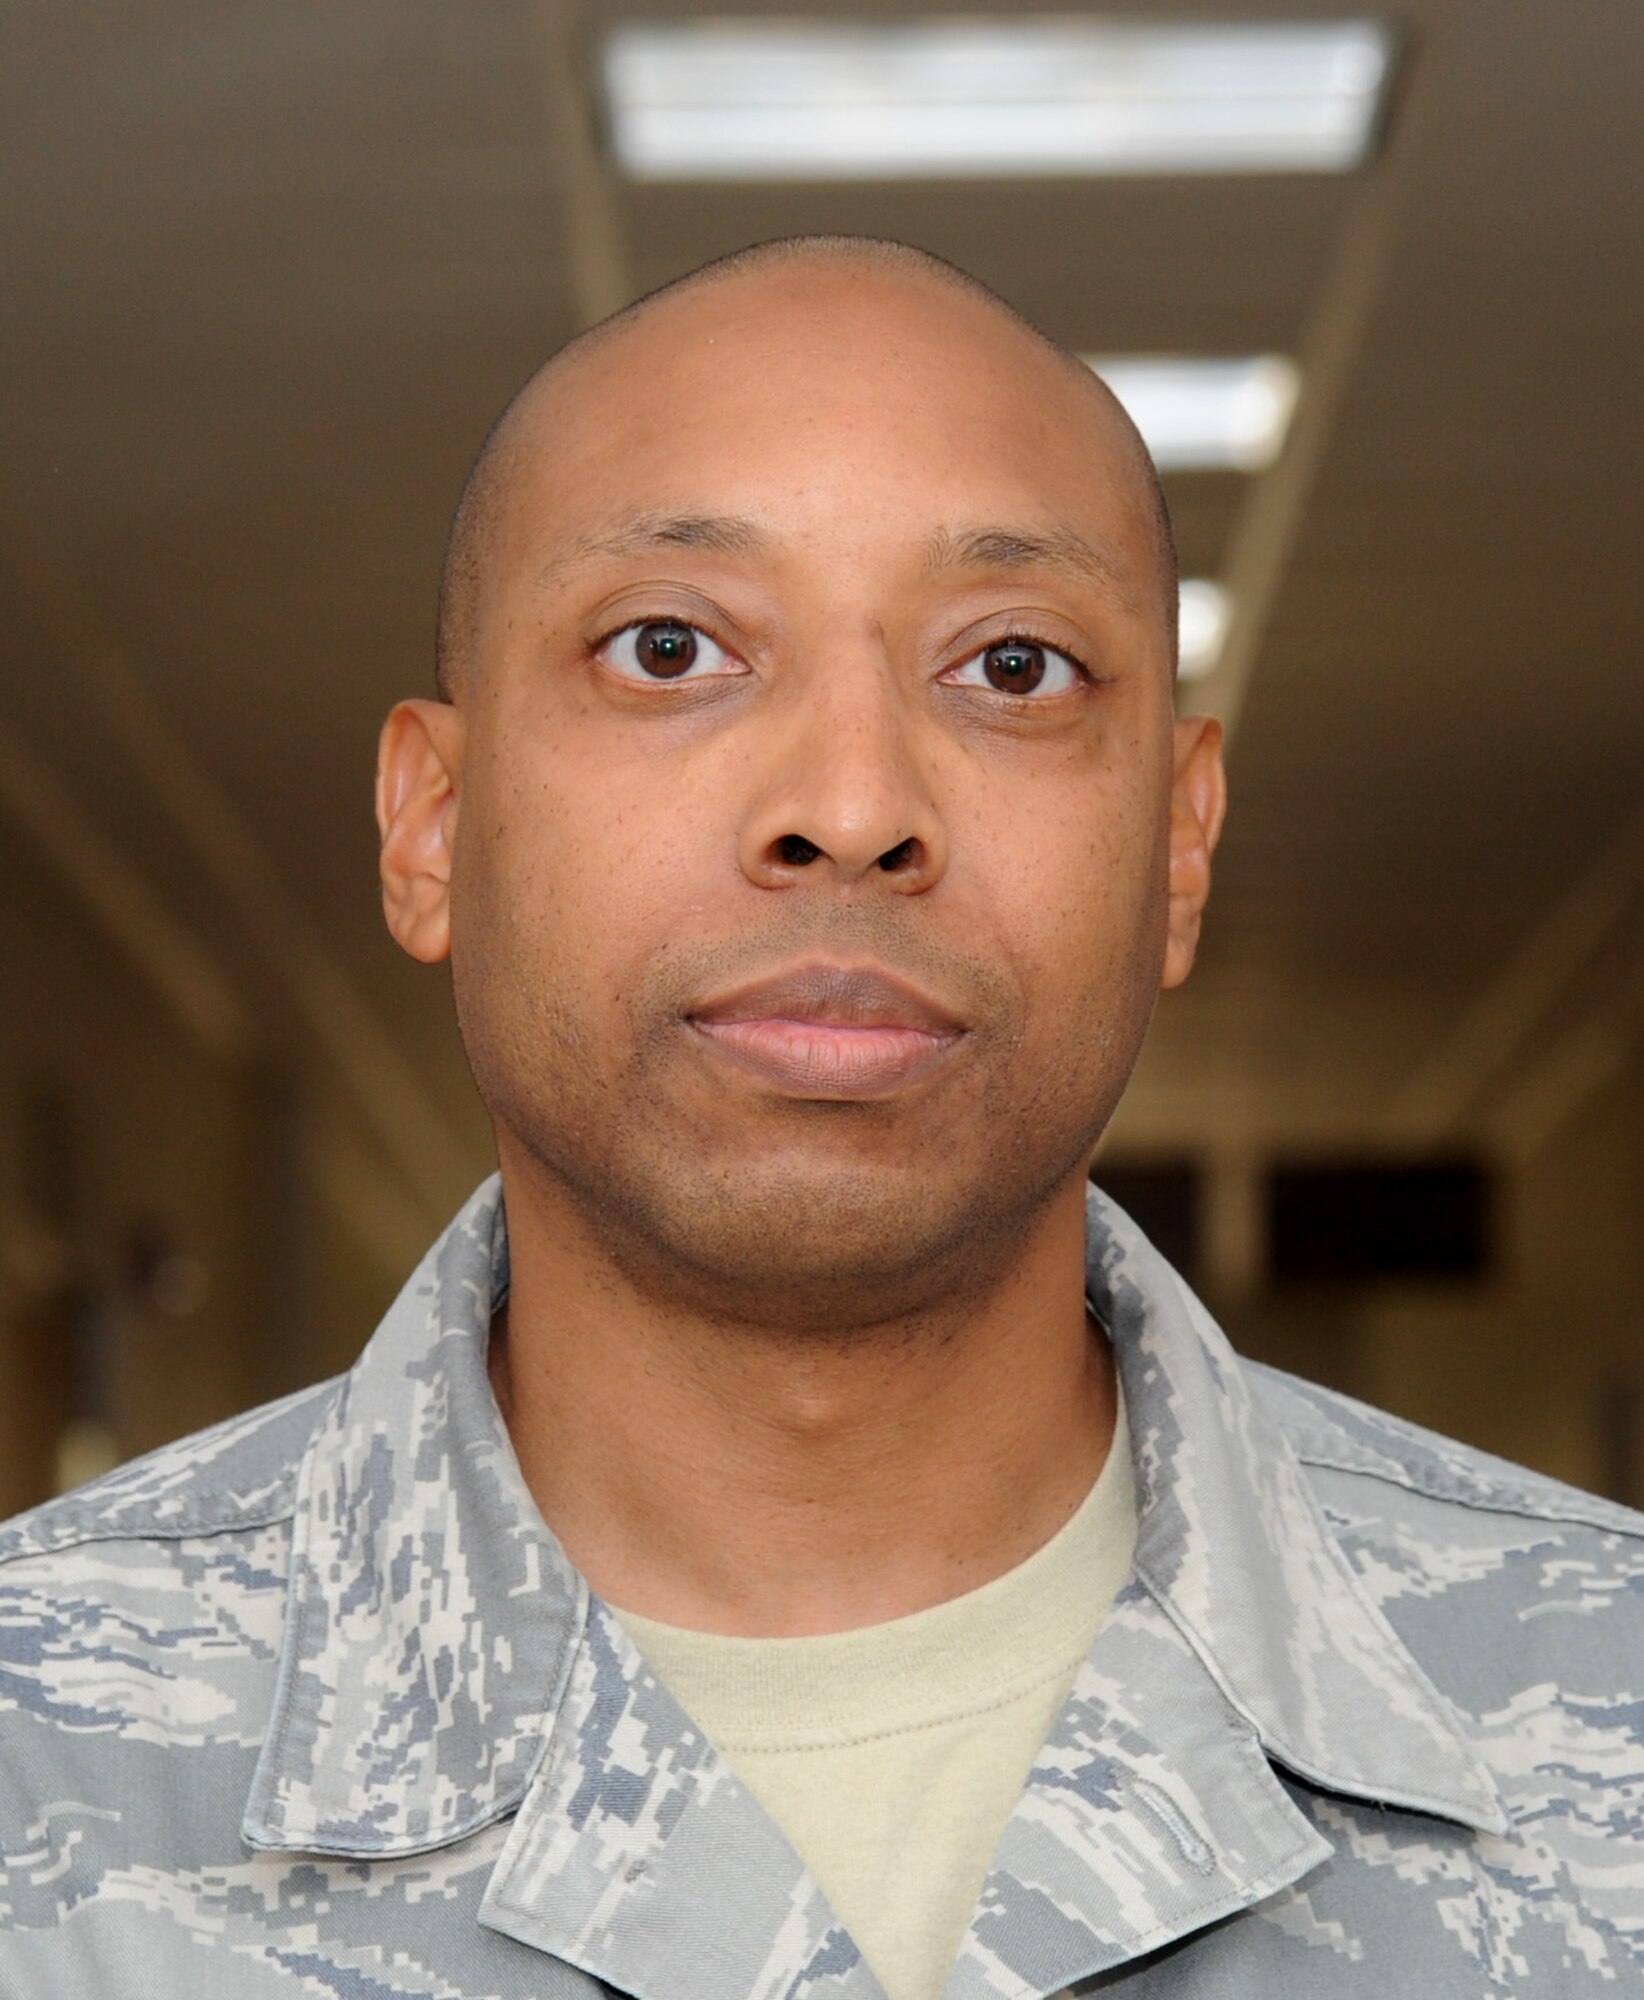 Master Sgt. Linford Smith, 2nd Air Force—It means freedom for all people!  (U.S. Air Force photo by Kemberly Groue)